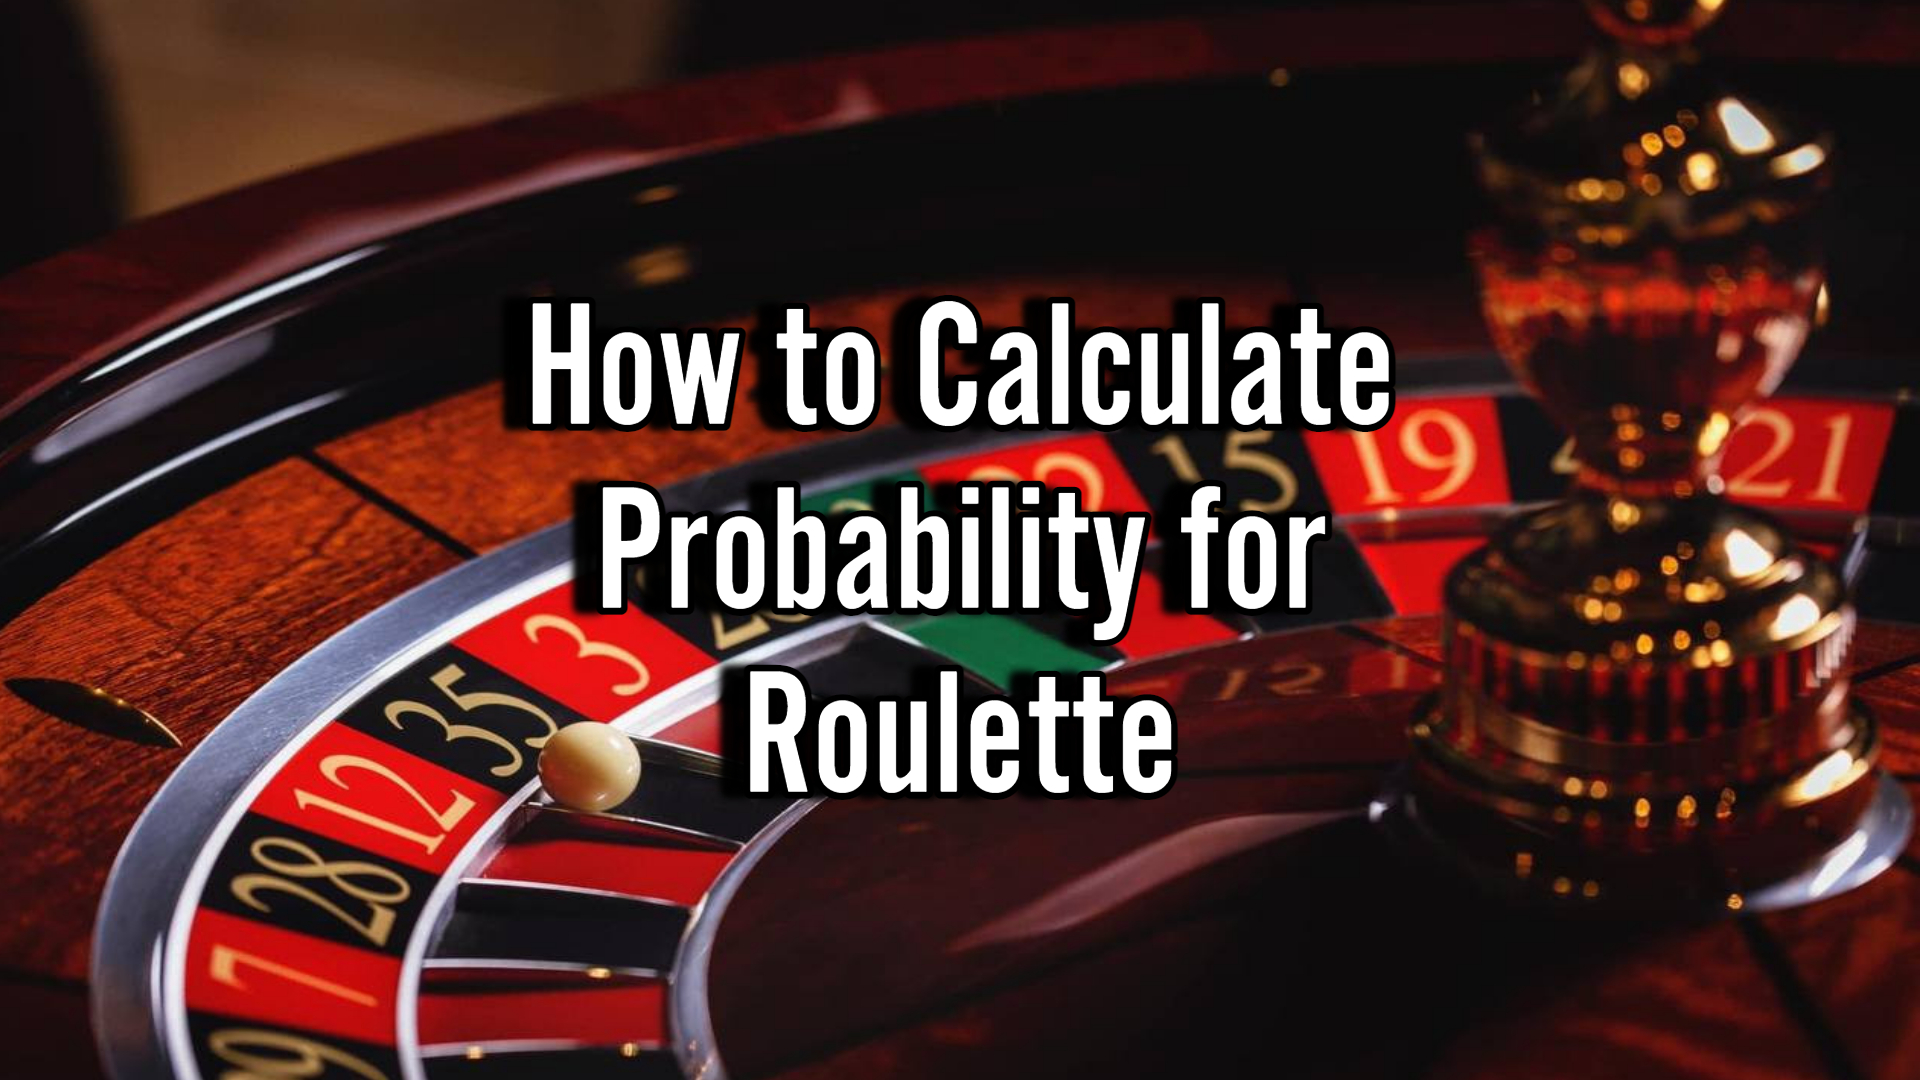 How to Calculate Probability for Roulette: 88% Winning Chance